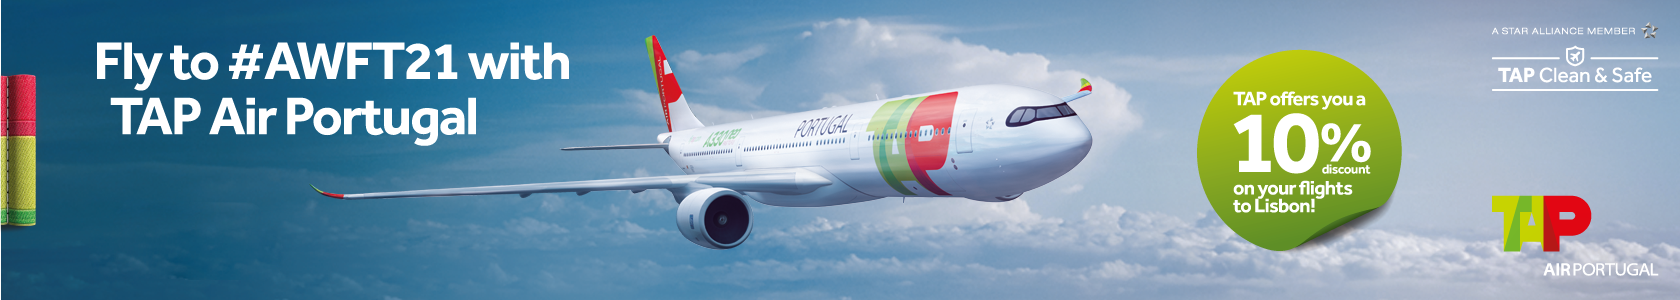 Fly to #AWFT21 with TAP Air Portugal